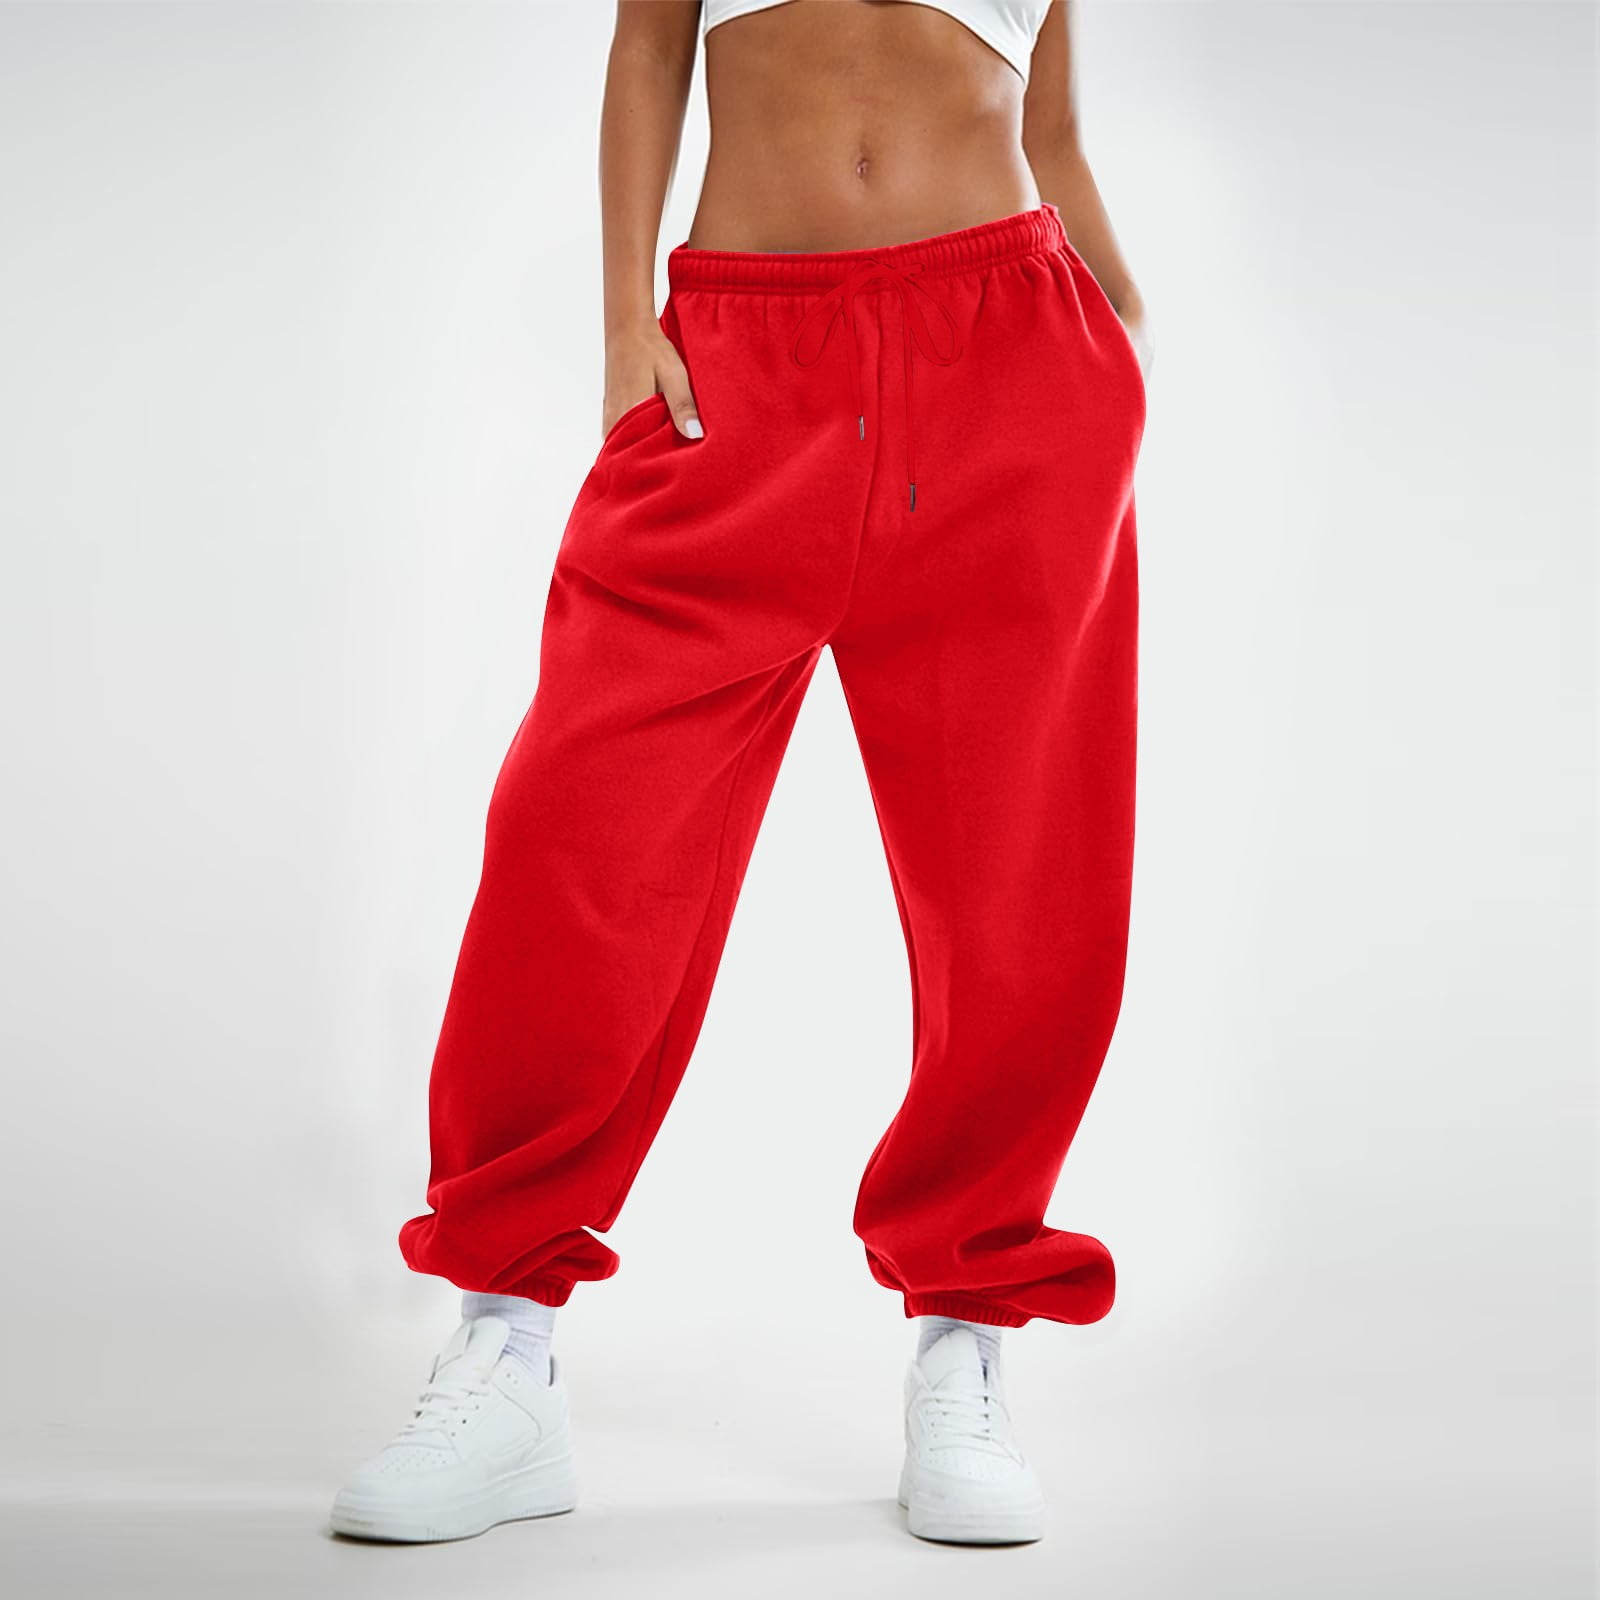 Dragon Fit Women's Fleece Workout Sweatpants Winter Baggy Cotton Joggers  Cinch Bottom Running Pants with Pockets